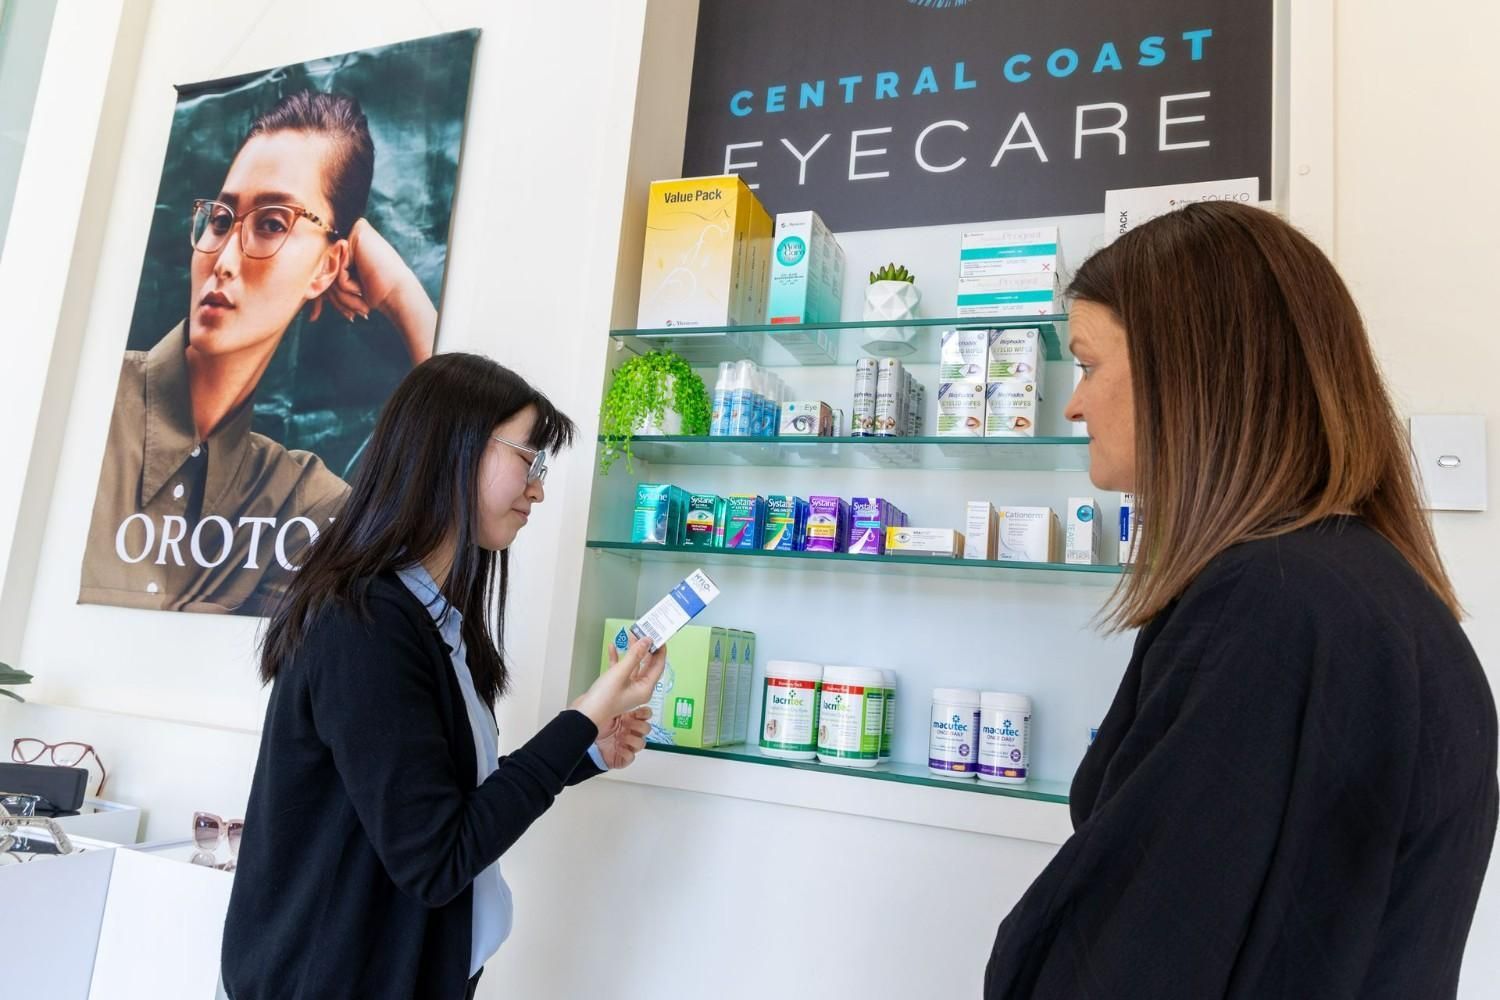 Optometrist and patient on eyecare products — Optometrist in Gosford, NSW